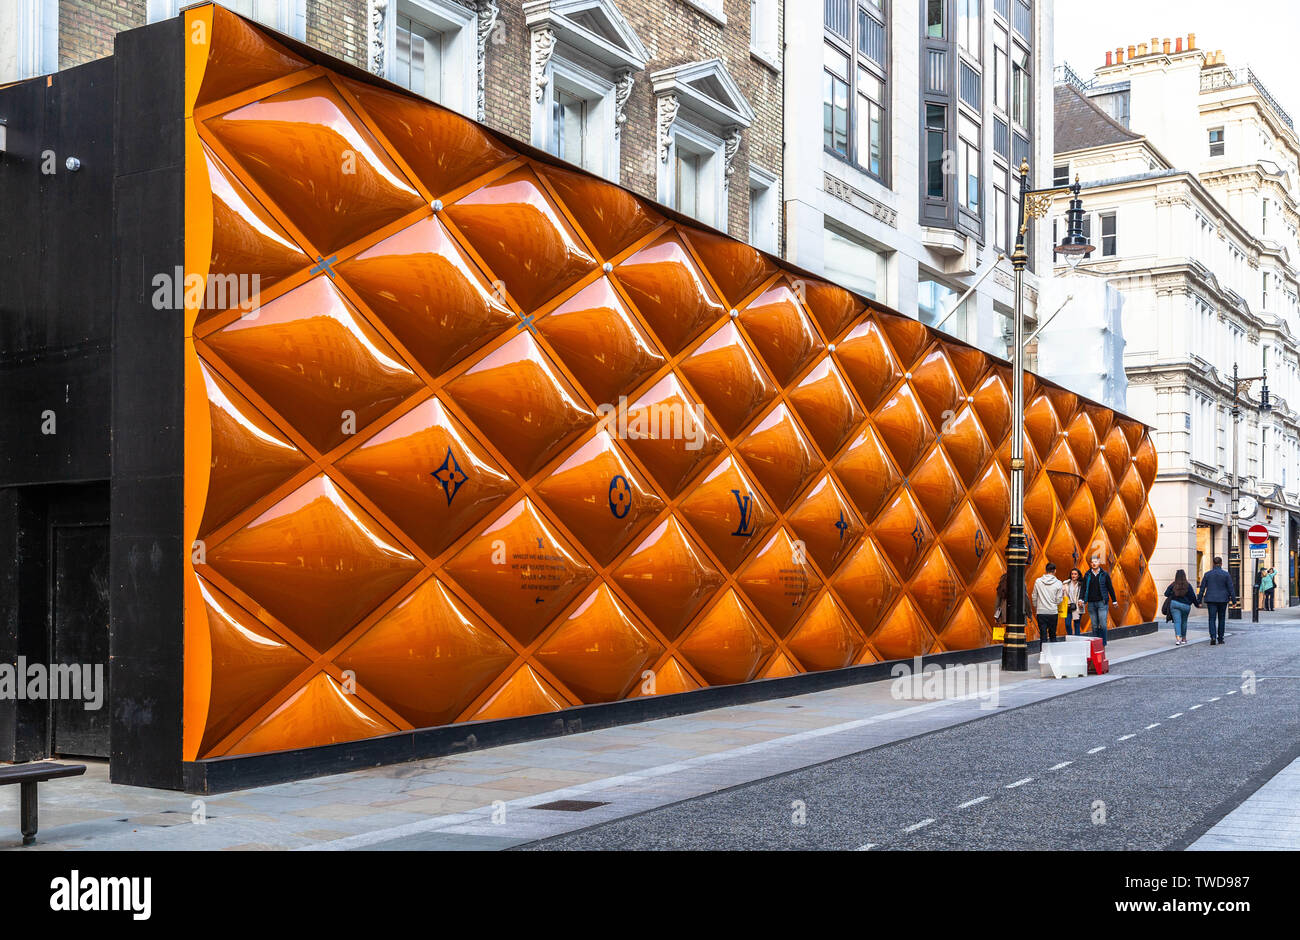 Louis vuitton new bond street hi-res stock photography and images - Alamy